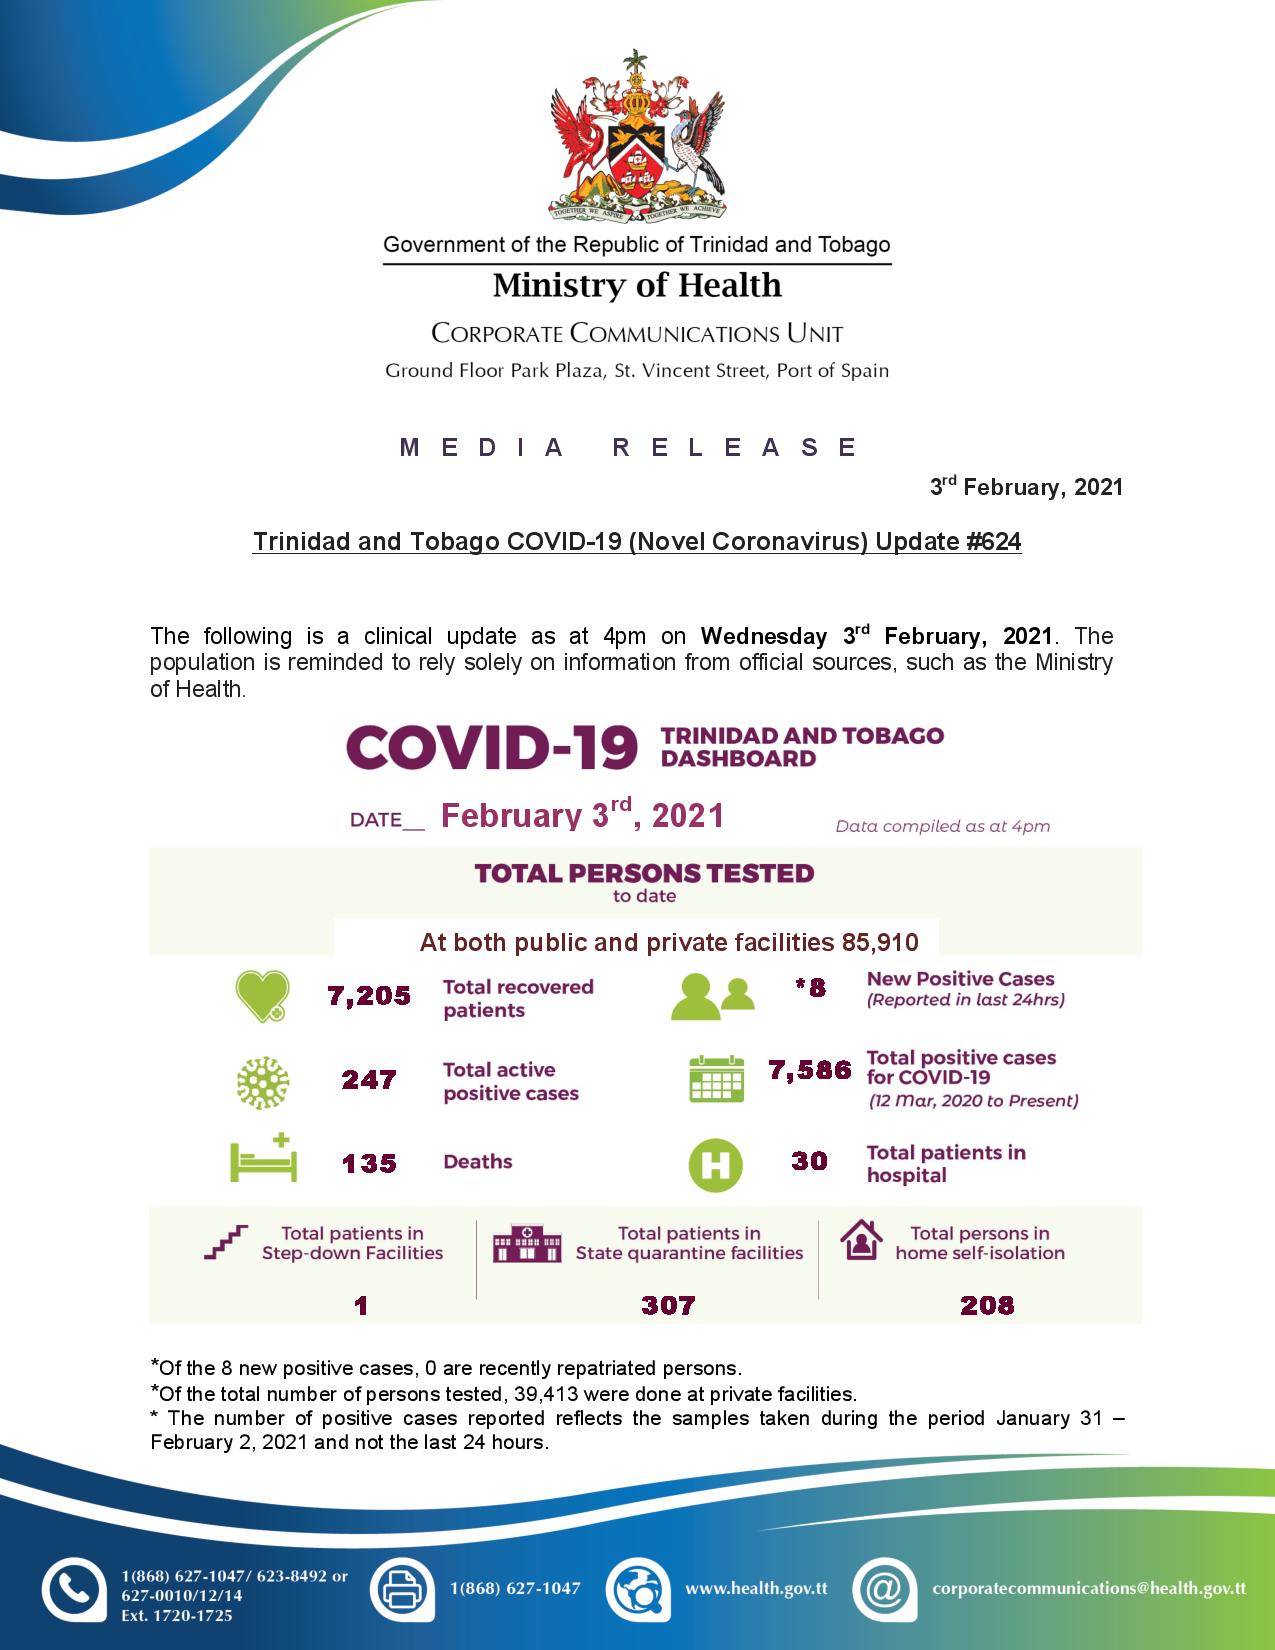 COVID-19 UPDATE - Wednesday 3rd February 2021